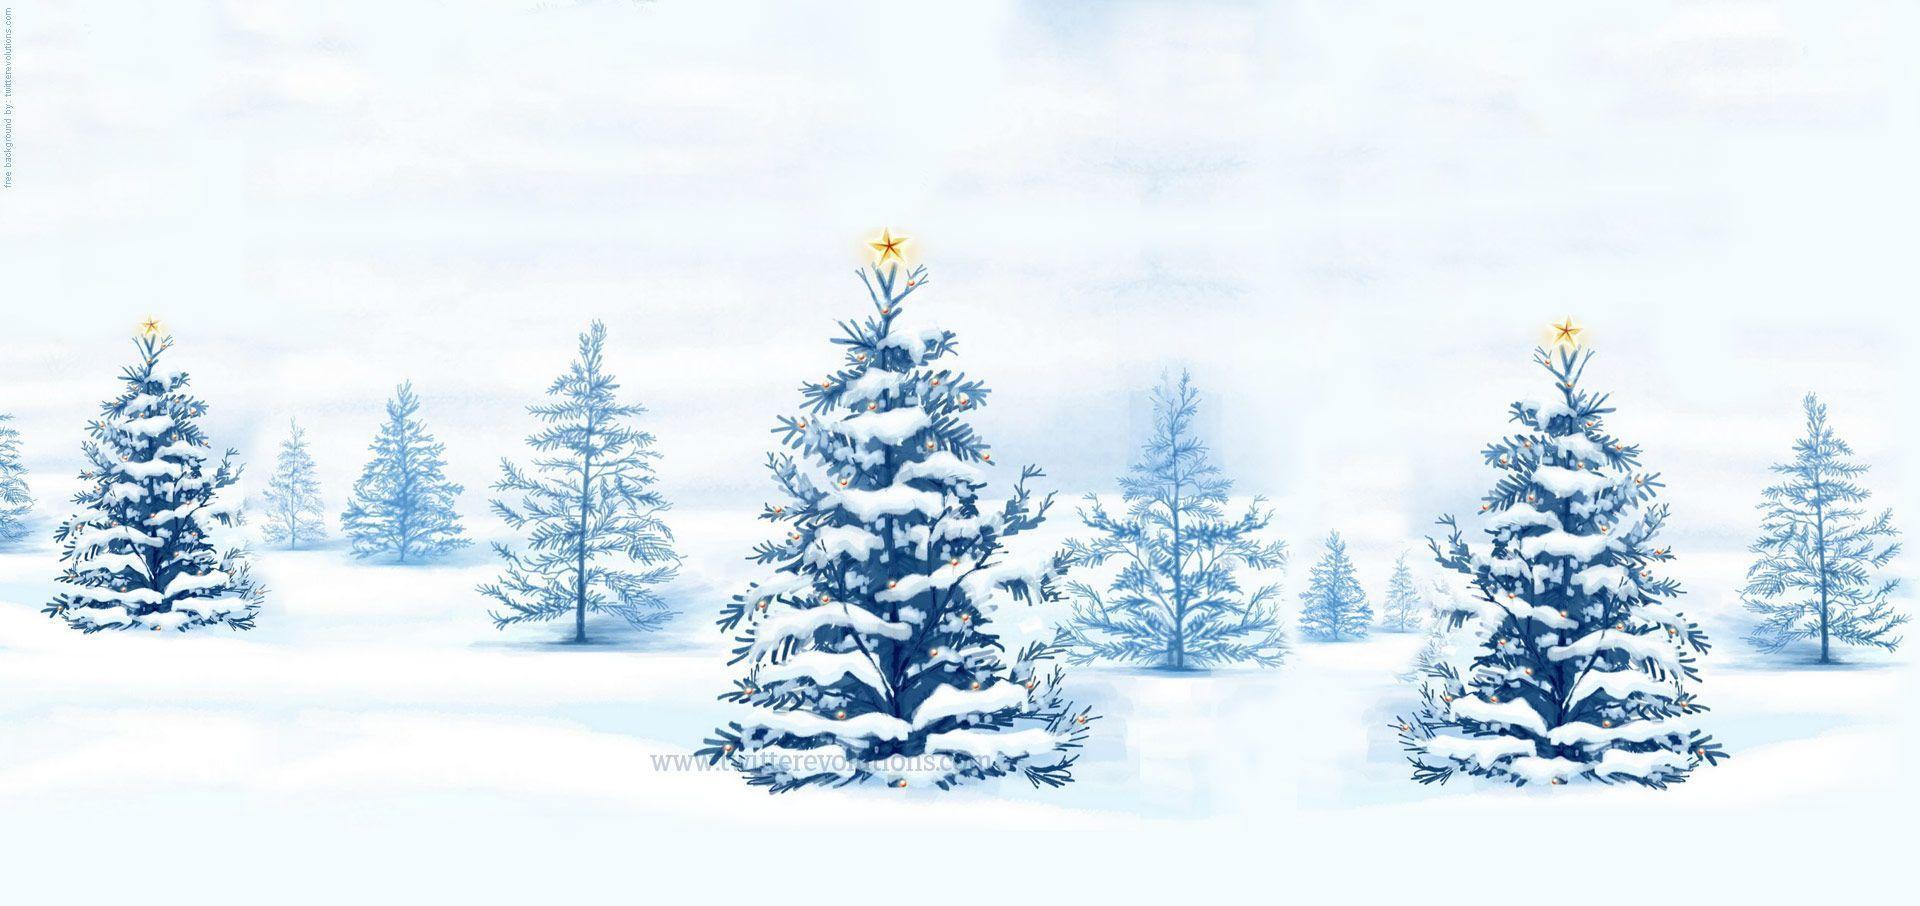 Winter snowy christmas trees Twitter background. Twitter